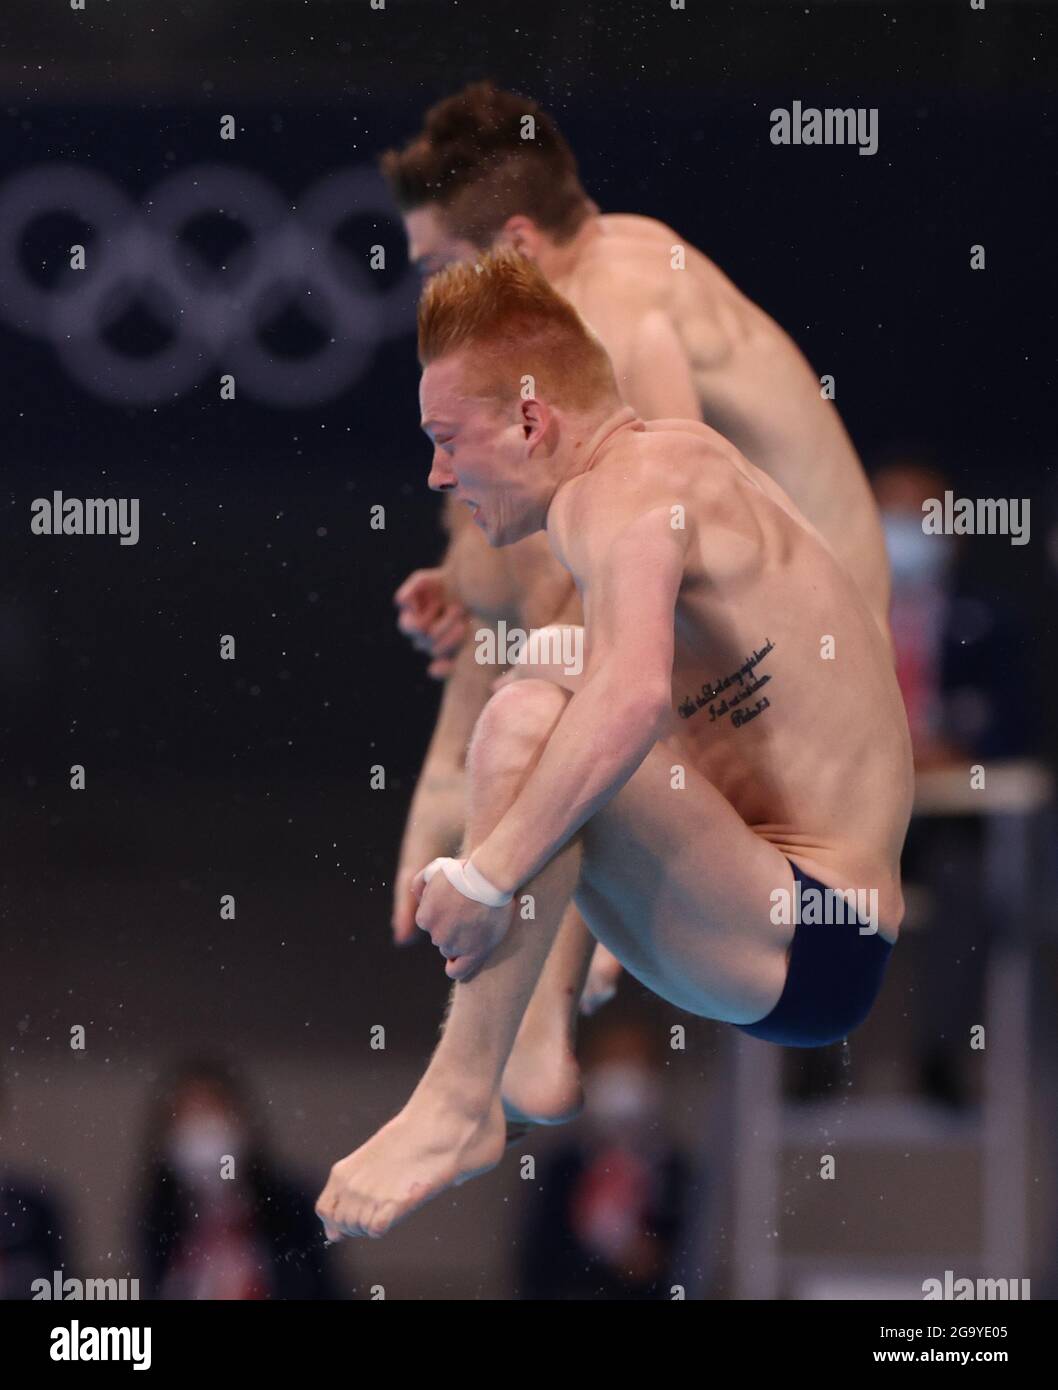 Tokyo, Japan. 28th July, 2021. Andrew Capobianco and Michael Hixon of the United States compete during diving men's synchronised 3m springboard final at the Tokyo 2020 Olympic Games in Tokyo, Japan, July 28, 2021. Credit: Ding Xu/Xinhua/Alamy Live News Stock Photo